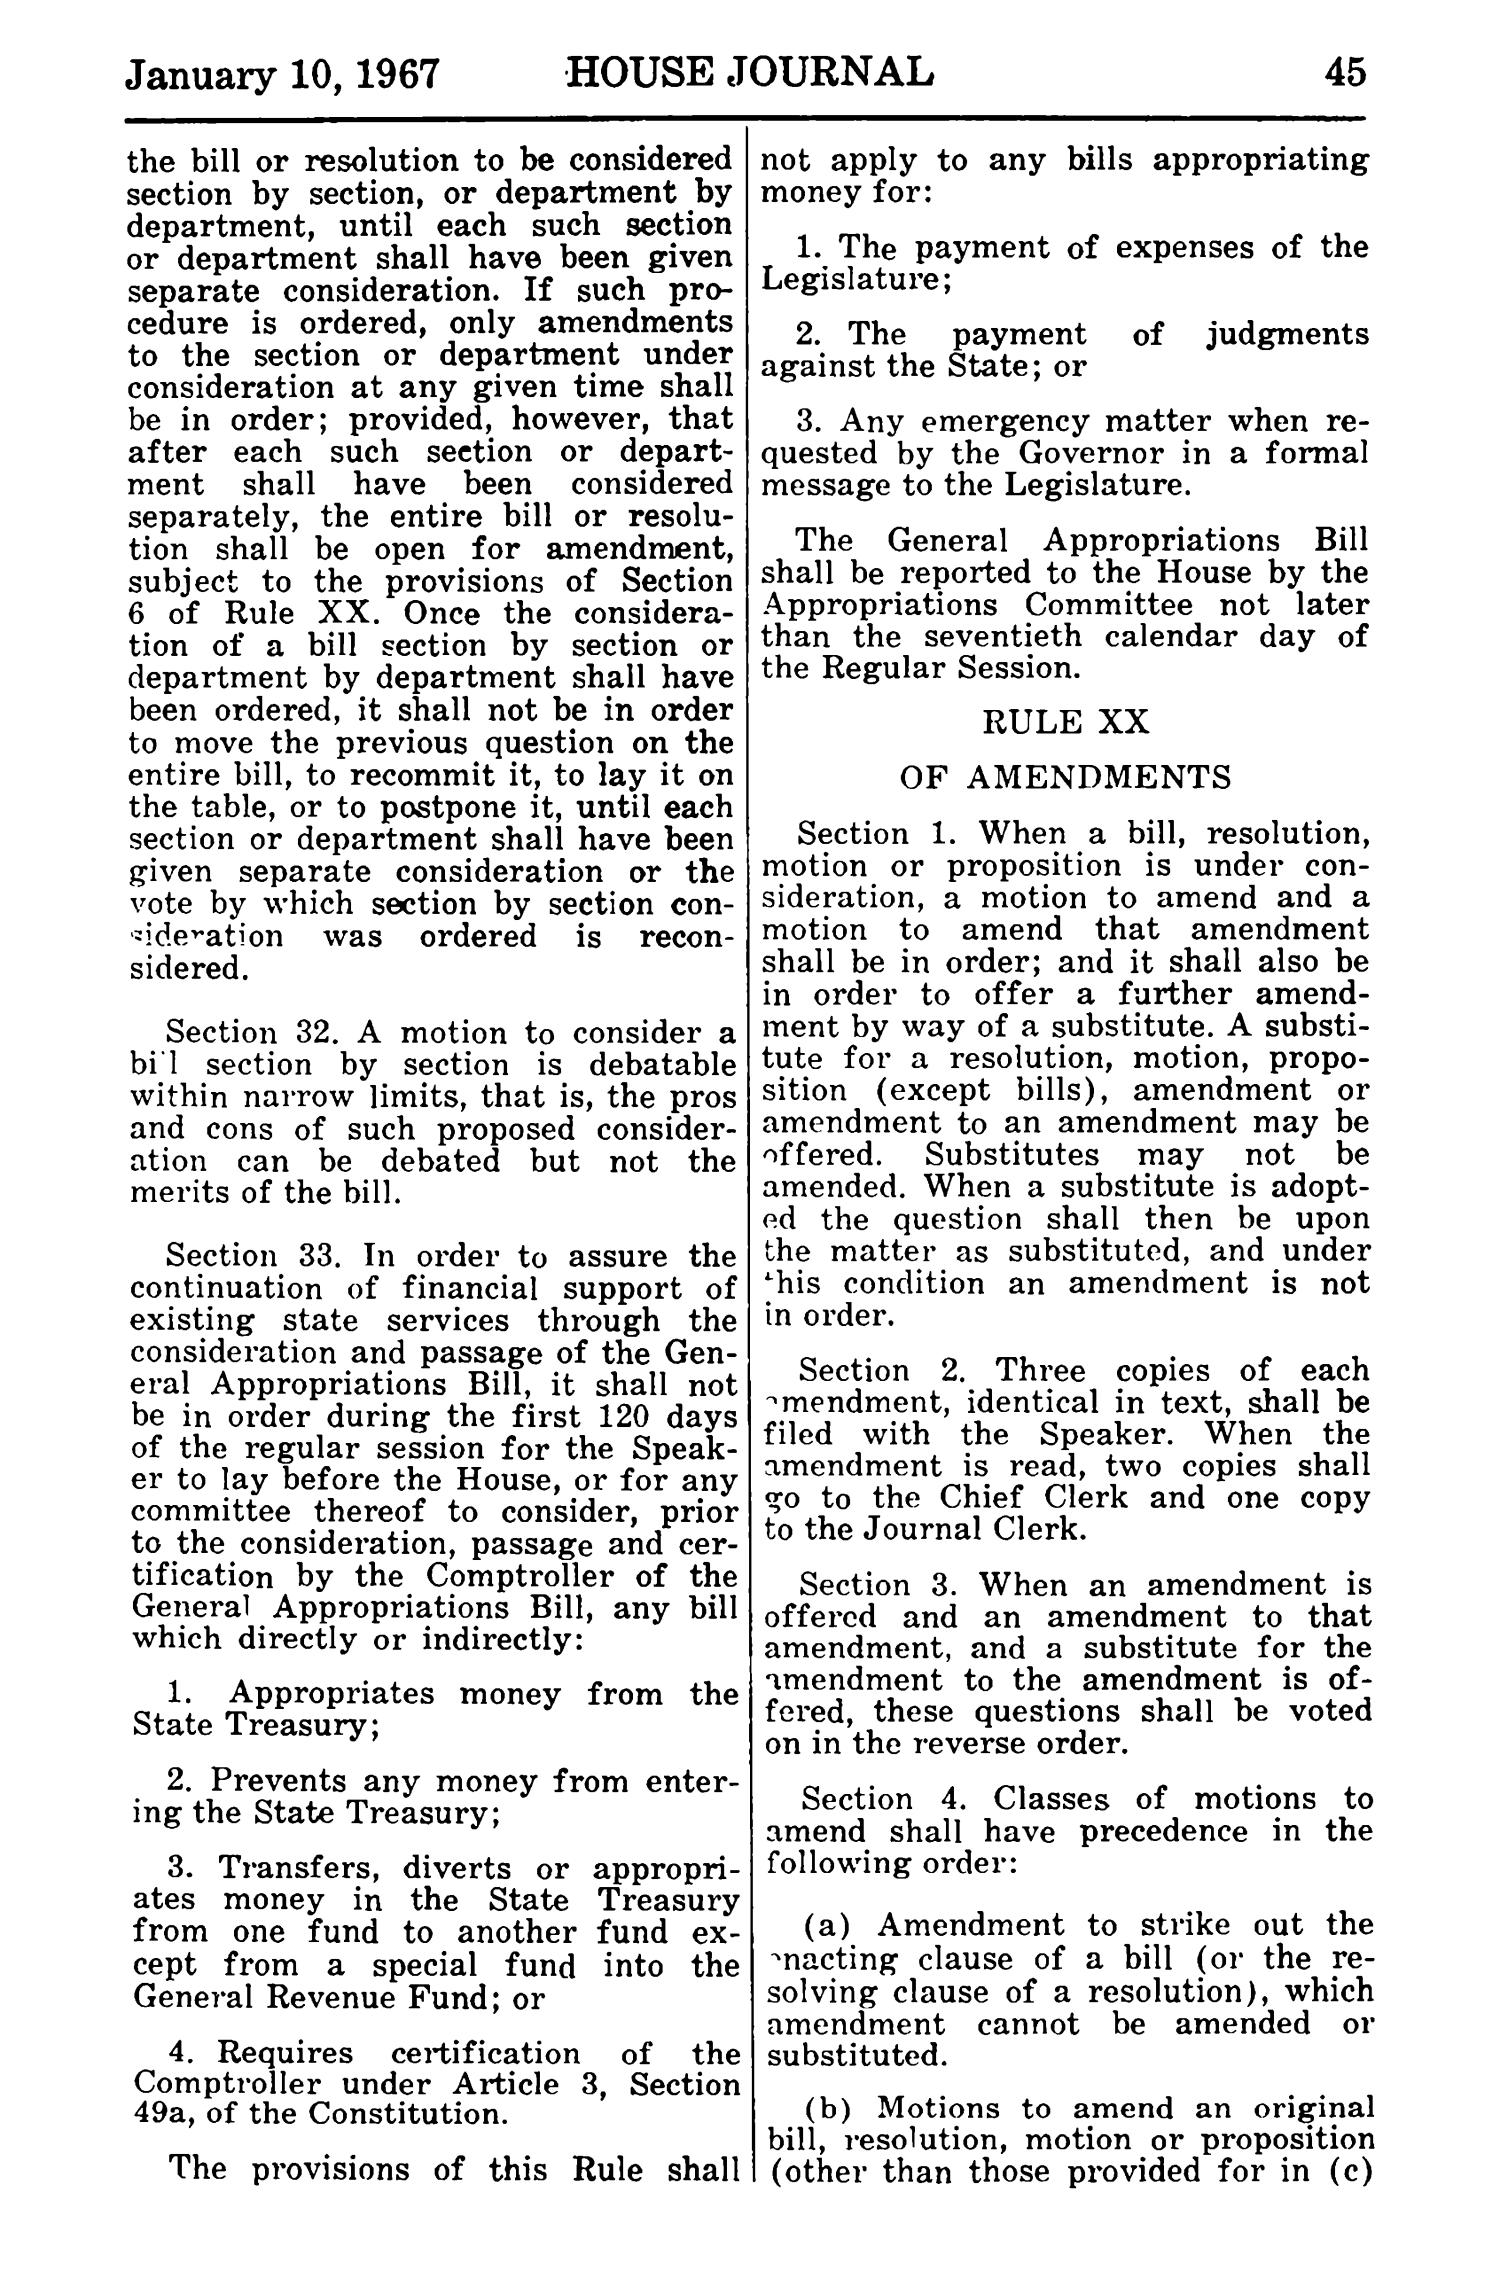 Journal of the House of Representatives of the Regular Session of the Sixtieth Legislature of the State of Texas, Volume 1
                                                
                                                    45
                                                